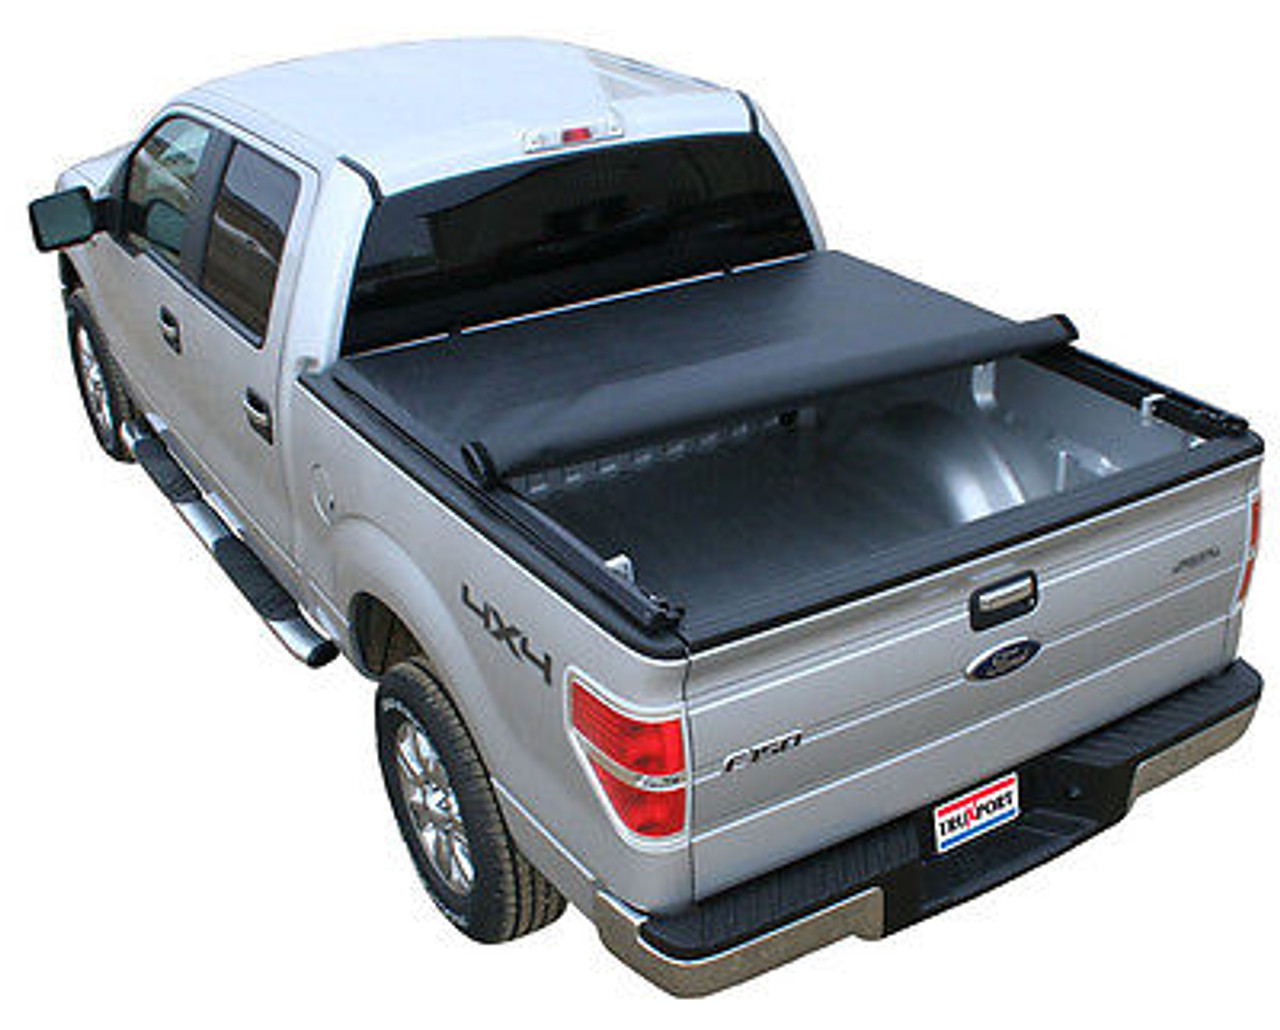 258601 - TRUXEDO TRUXPORT SOFT ROLL UP TONNEAU COVER 97-03 FORD F150 8' BED NO FLARESIDE